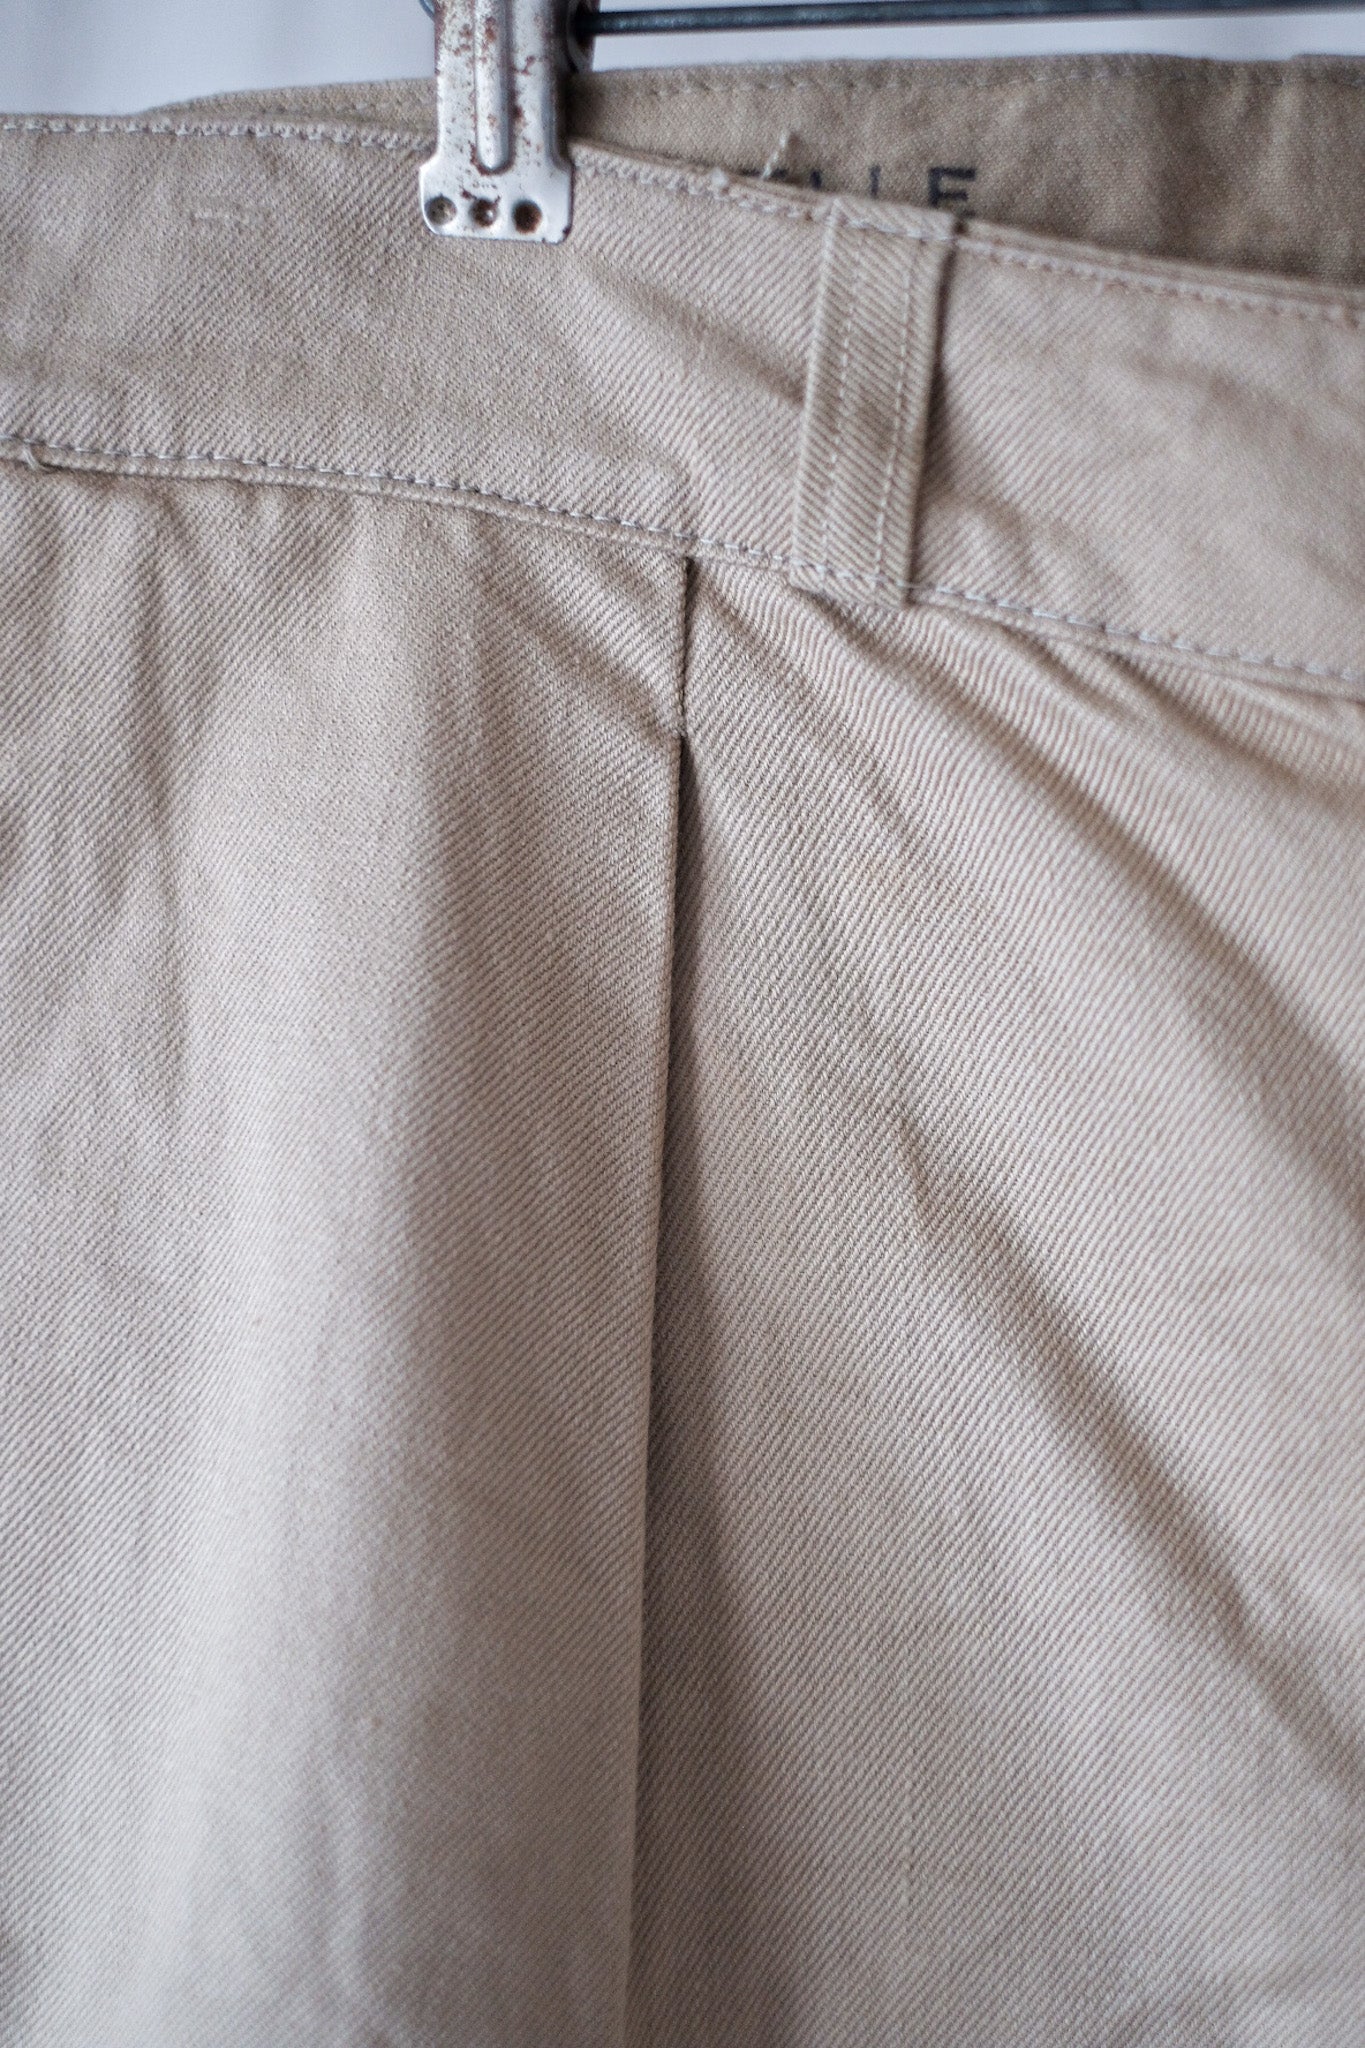 [~ 60's] French Army M52 CHINO SHORTS SIZE.5